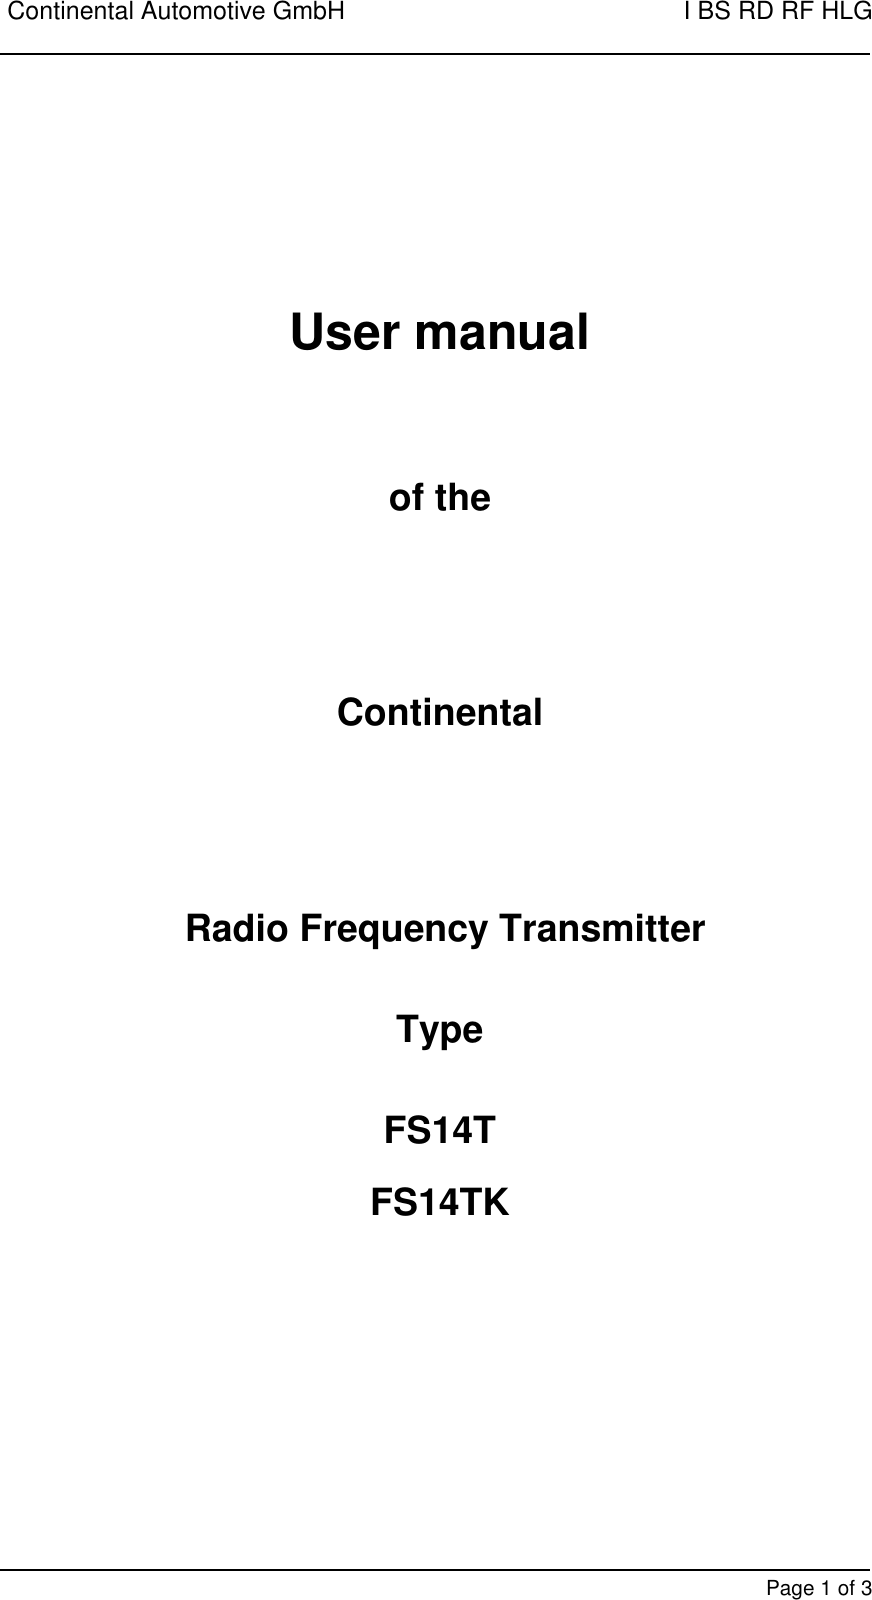 Continental Automotive GmbH    I BS RD RF HLG        Page 1 of 3     User manual   of the     Continental     Radio Frequency Transmitter   Type   FS14T  FS14TK          